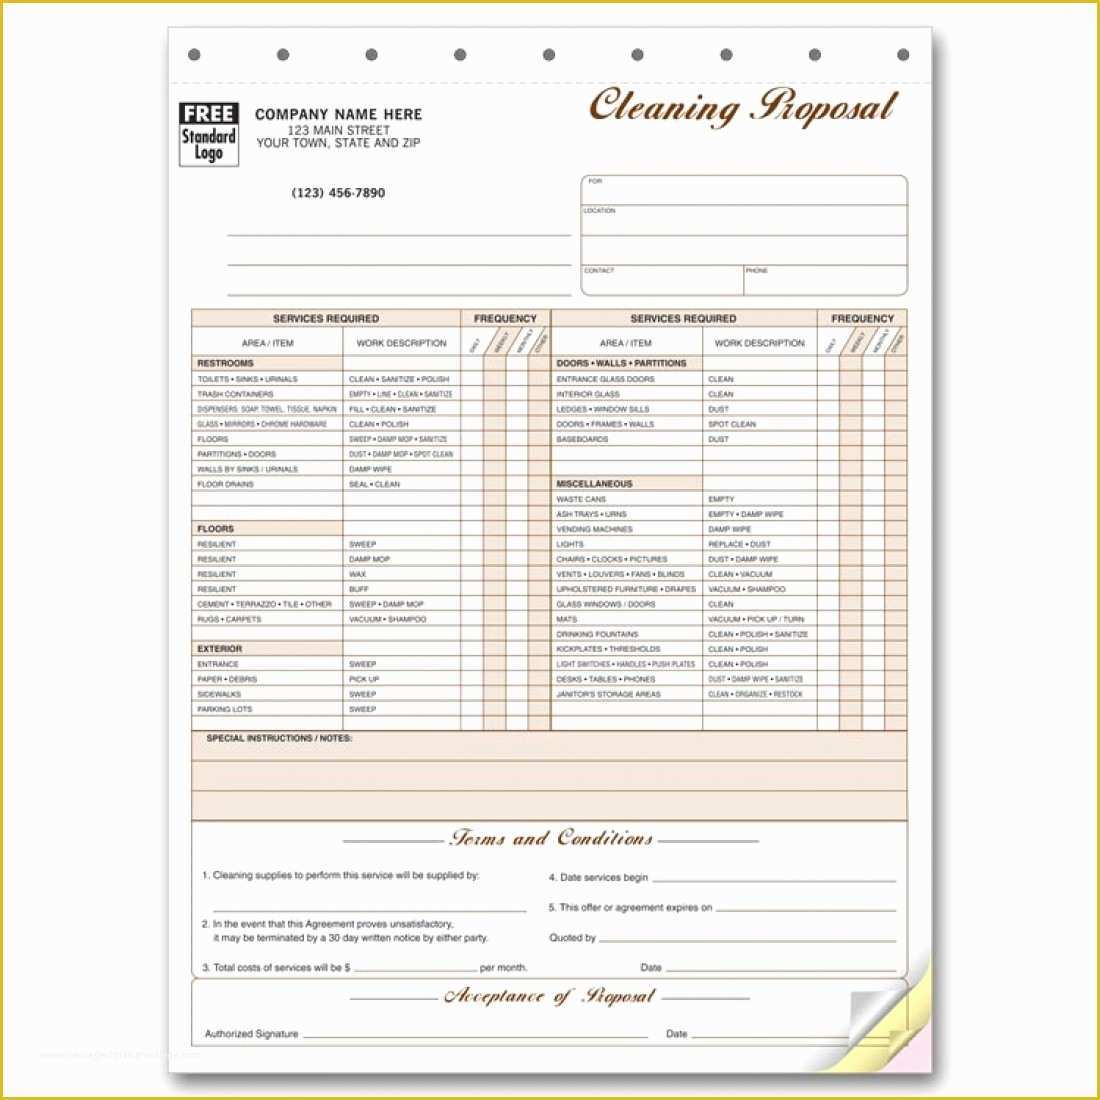 Free Cleaning Proposal Template Of Cleaning Proposal forms